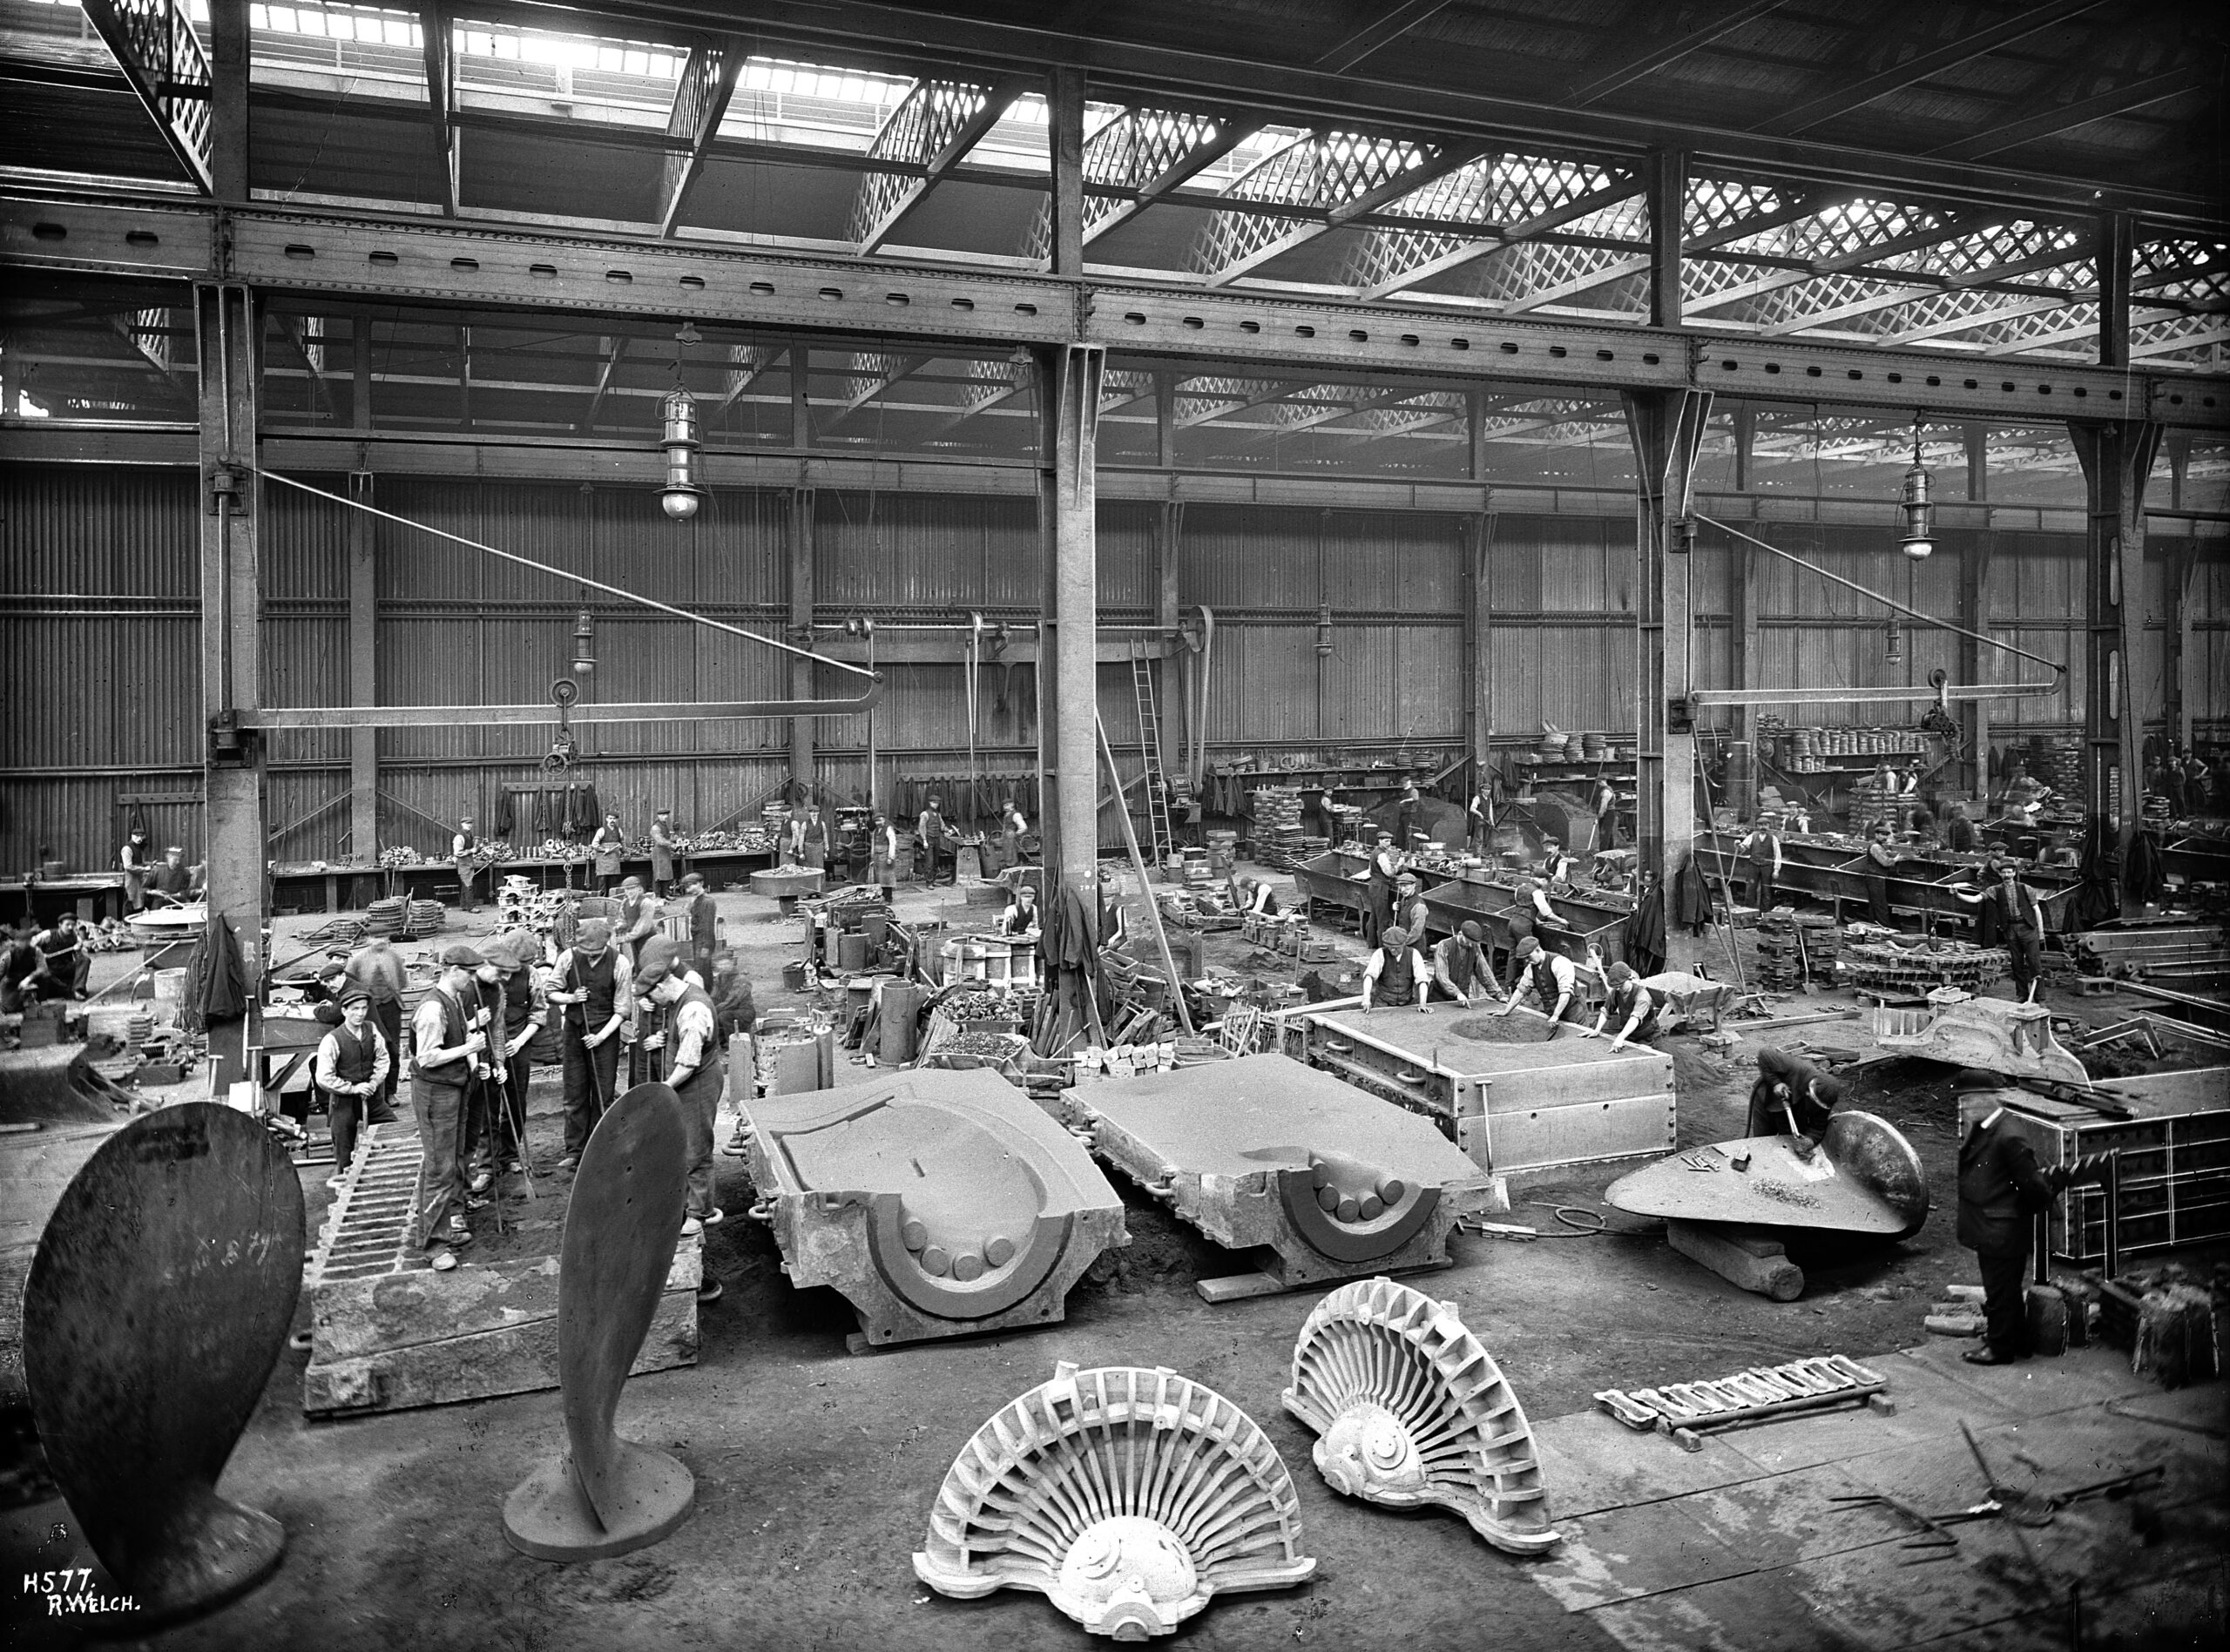 The workshop at Harland & Wolff where castings were made. Here, you can see forms for some of the propeller blades, including a workman finishing a blade on the right from the Titanic Connections Archive